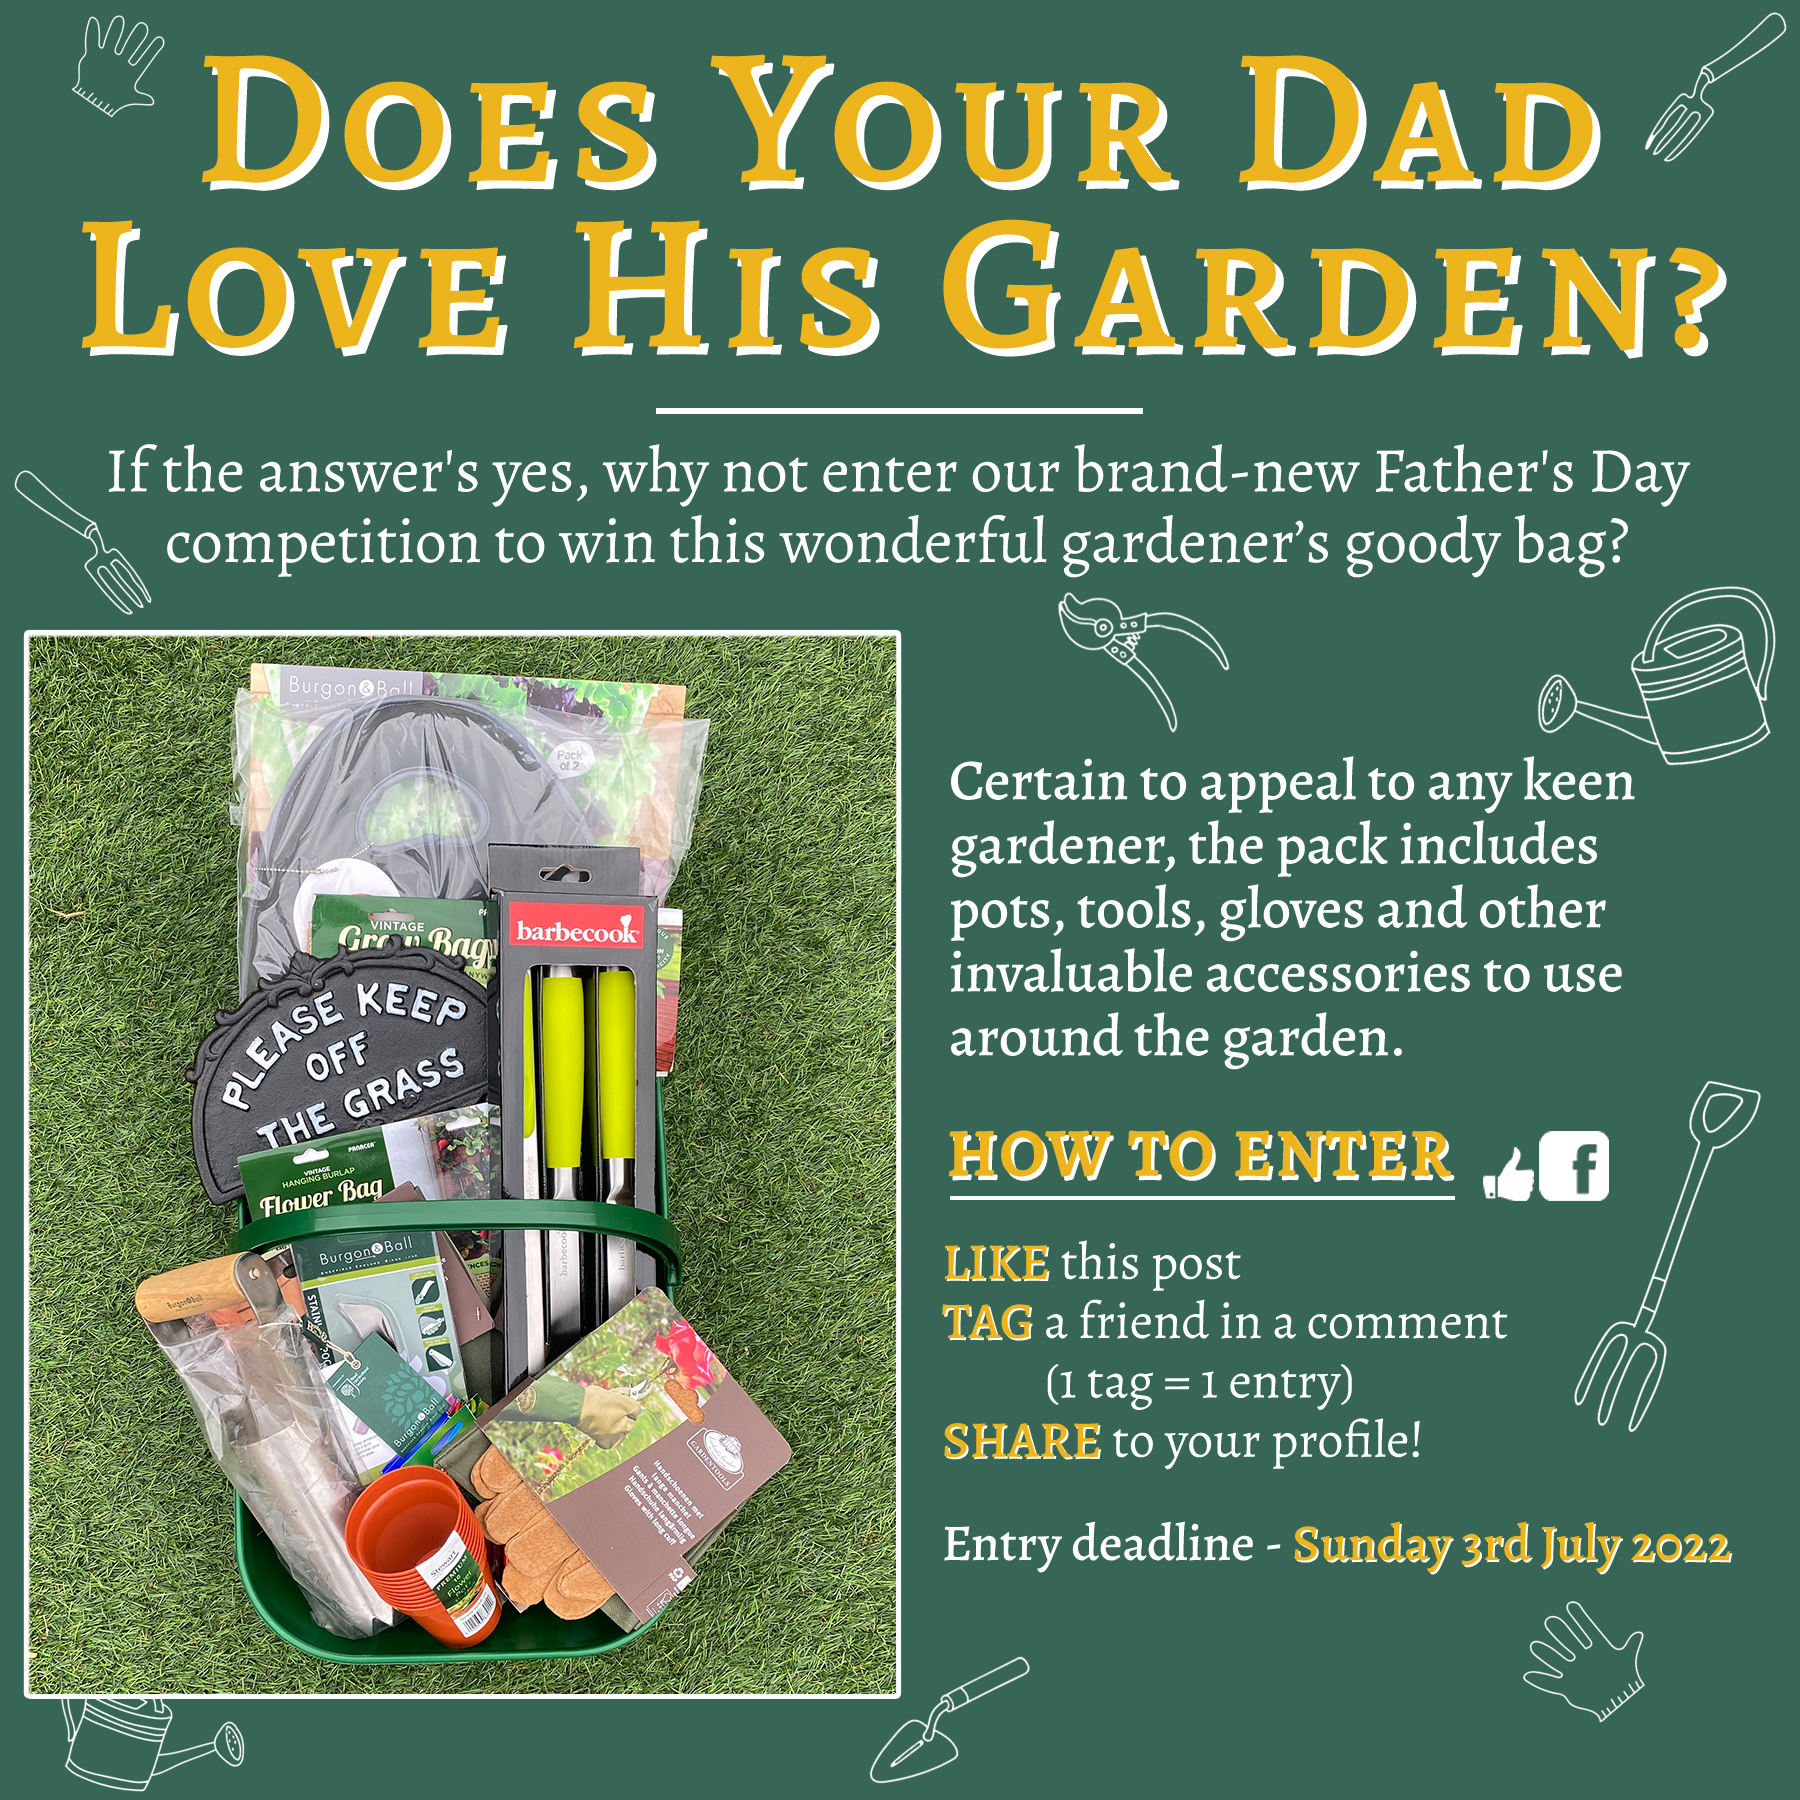 Father's Day giveaway goody bag